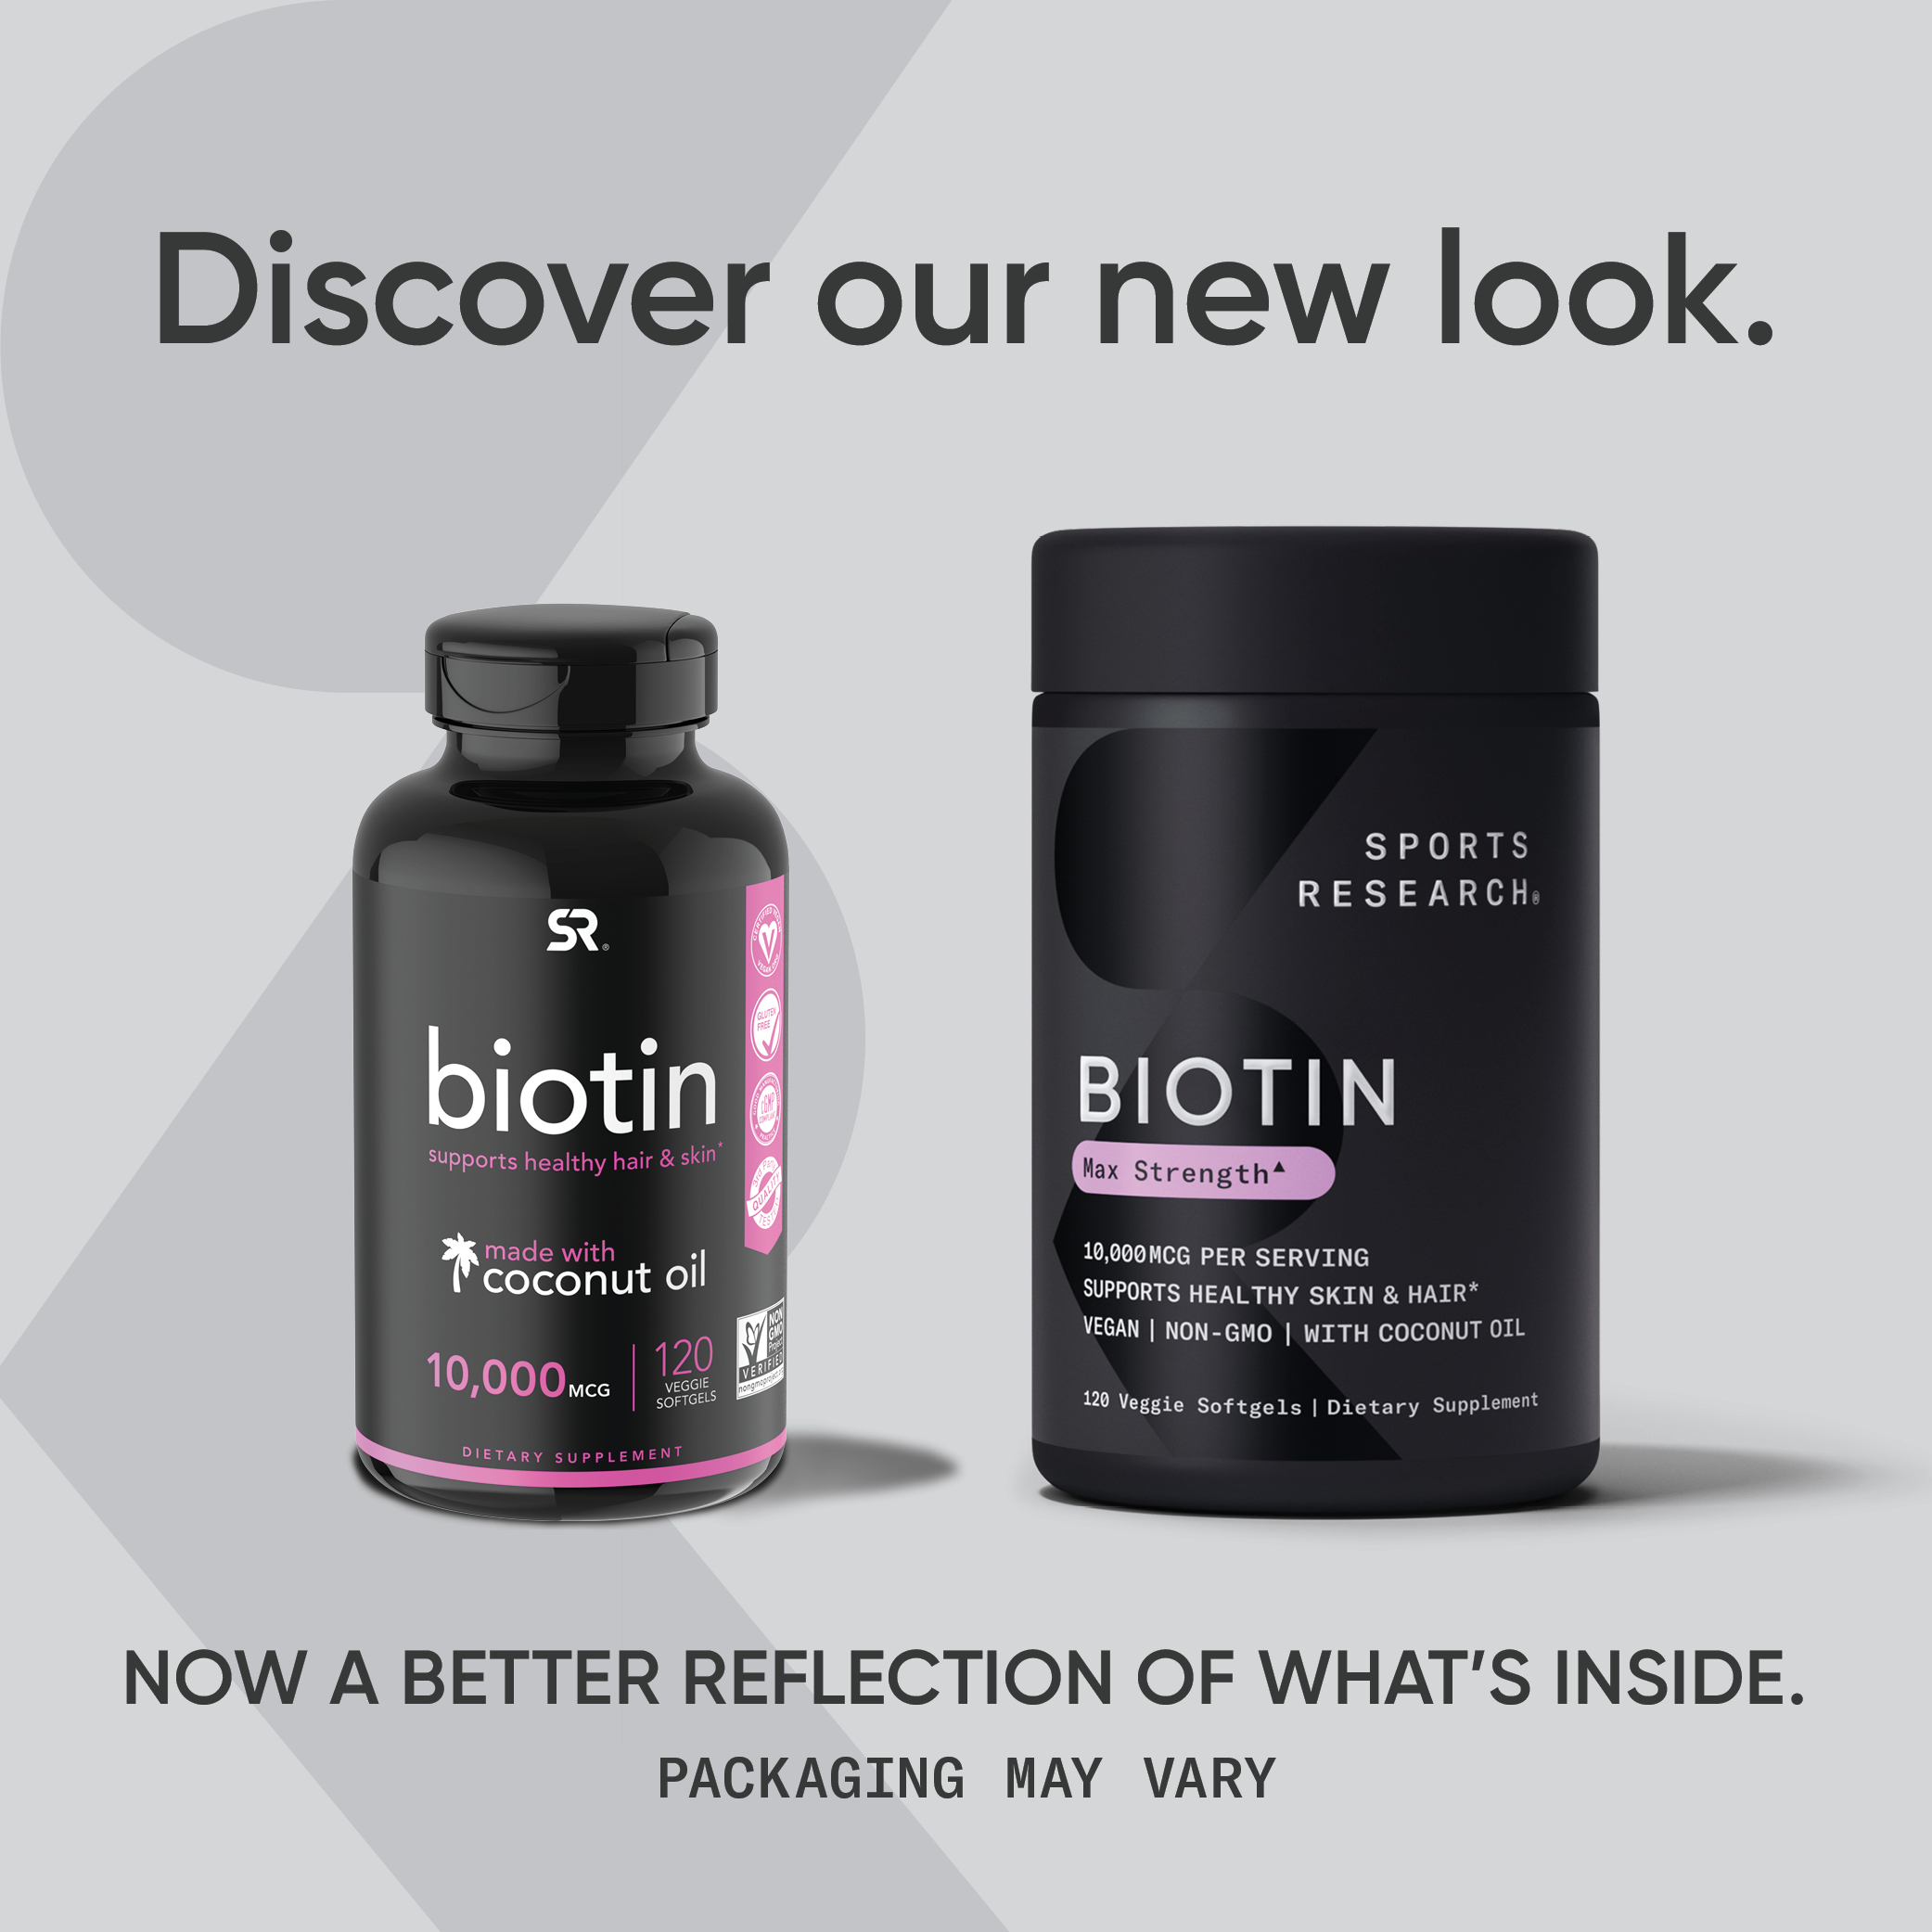 Sports Research Biotin with Coconut Oil, 10,000 mcg, 120 Veggie Softgels - image 3 of 7